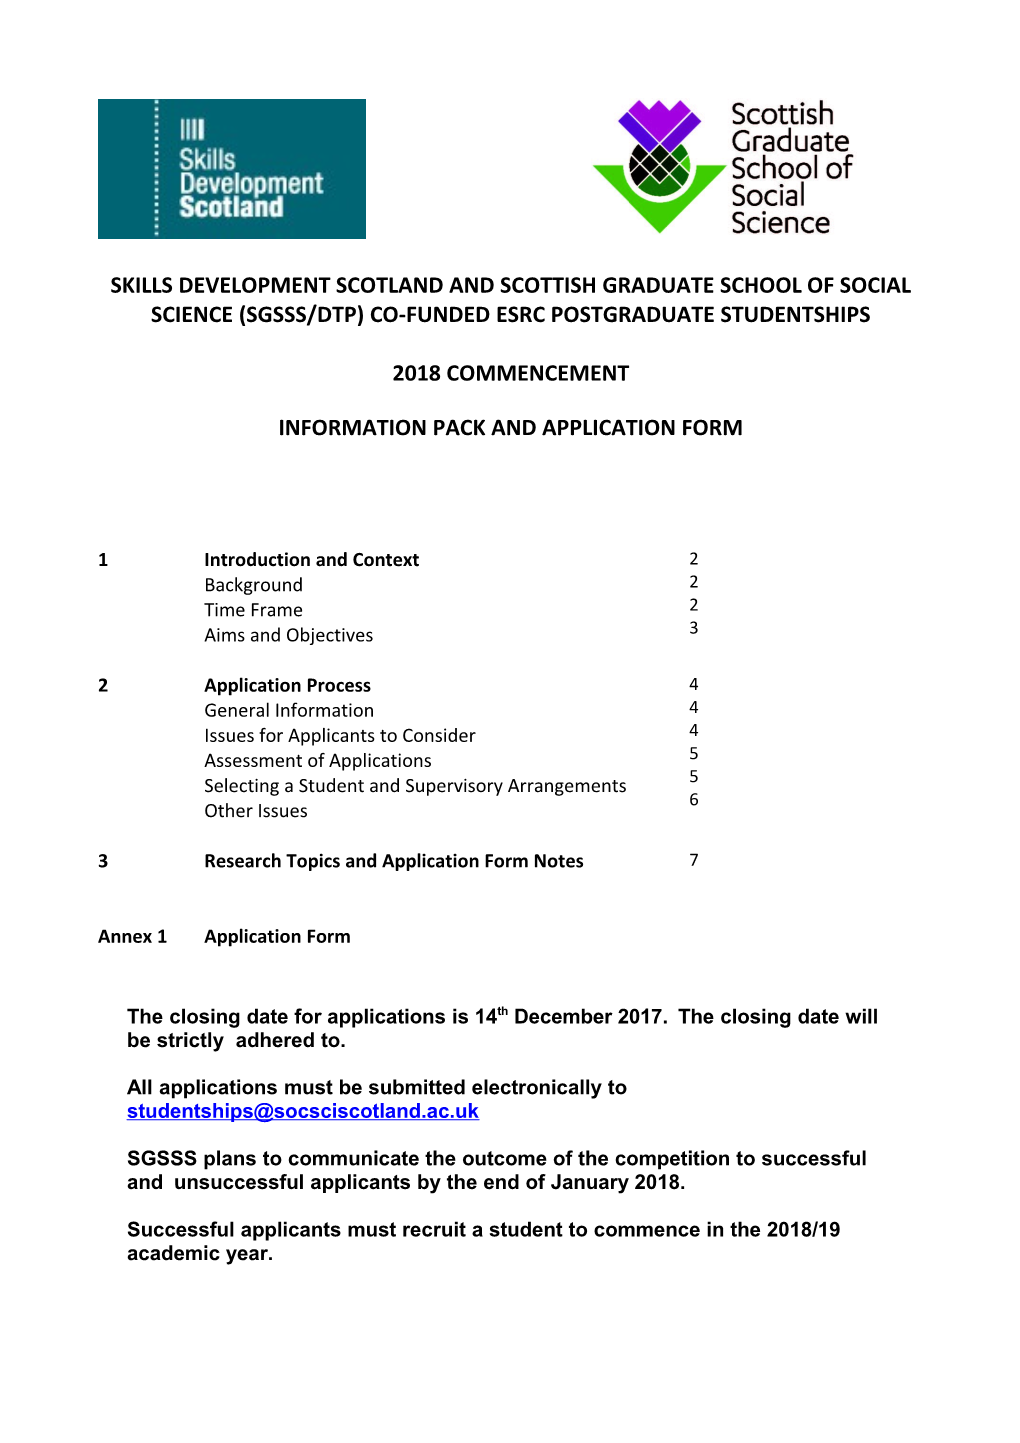 Information Pack and Application Form